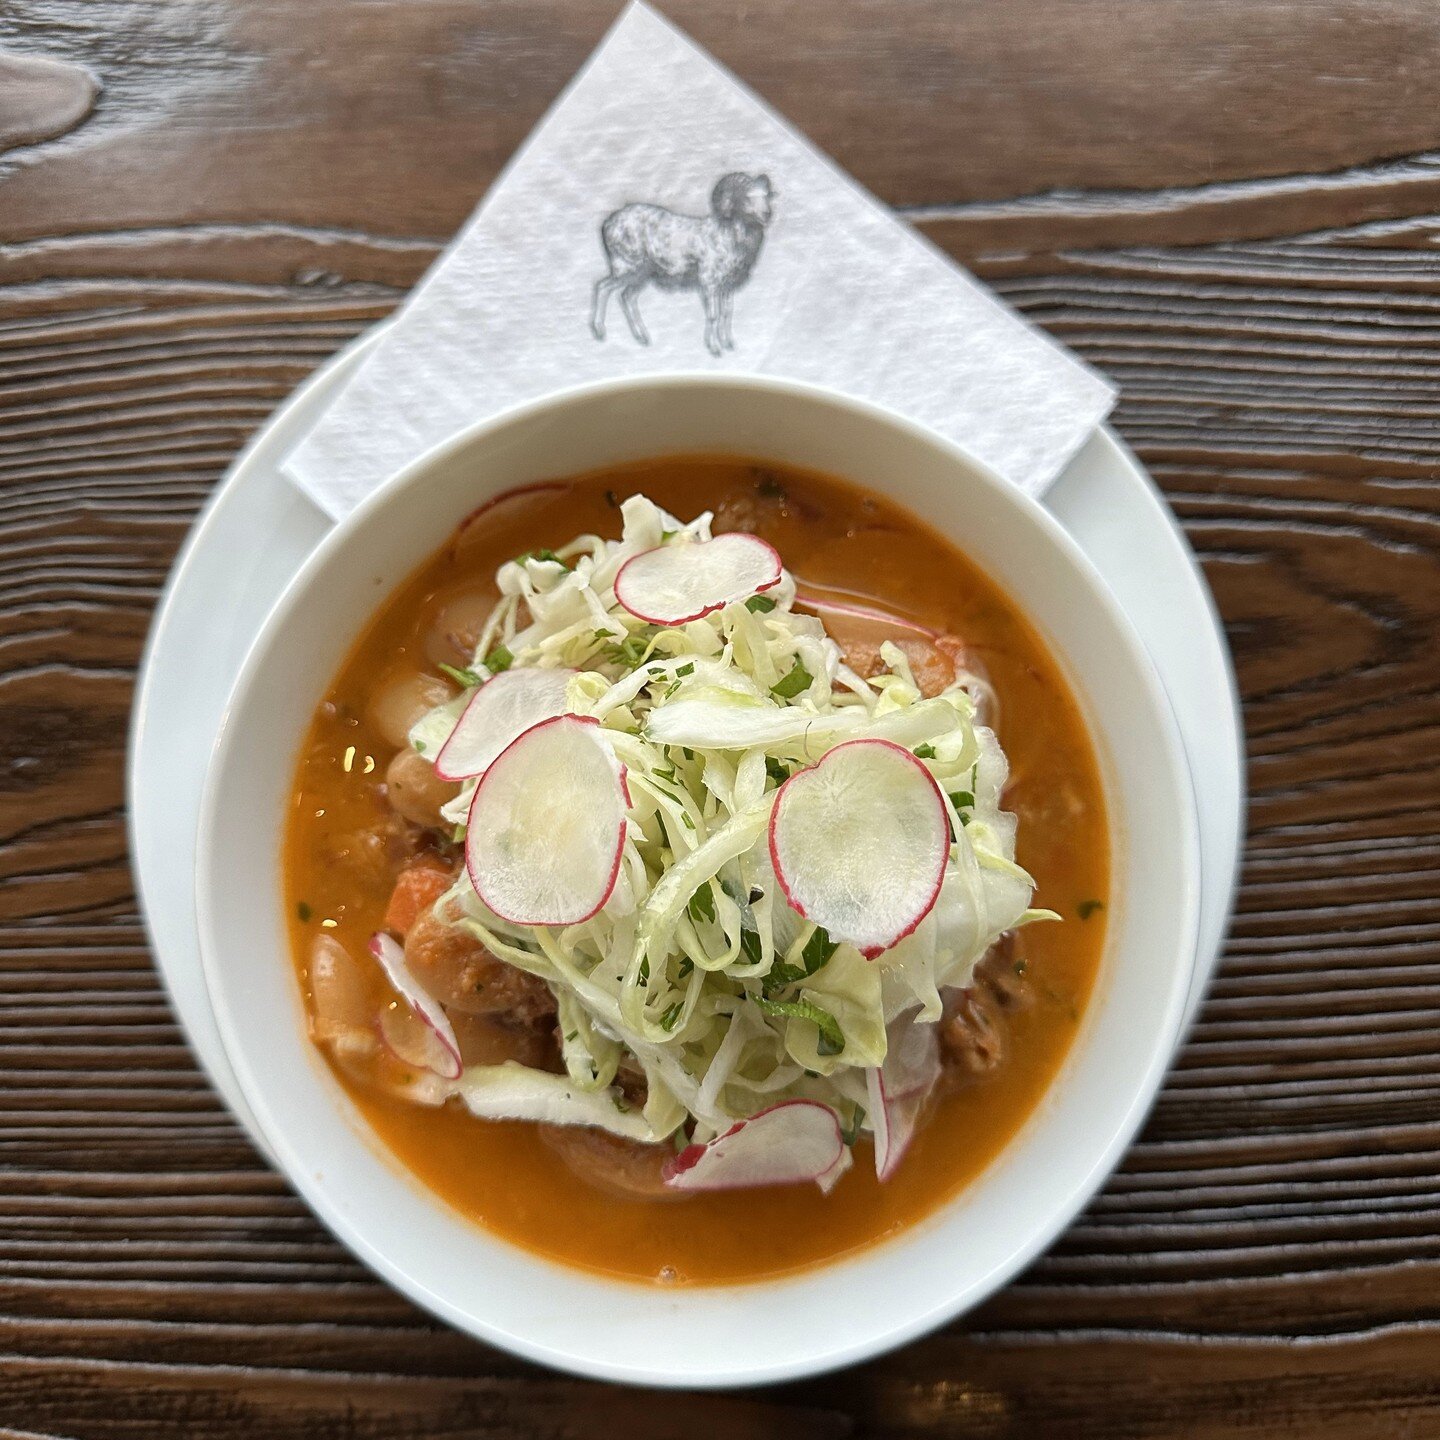 Ready for the weekend? Warm up with braised Berkshire pork and gigante beans, shaved cabbage with radish toast

#njeats #njrestaurants #foodie #fresh